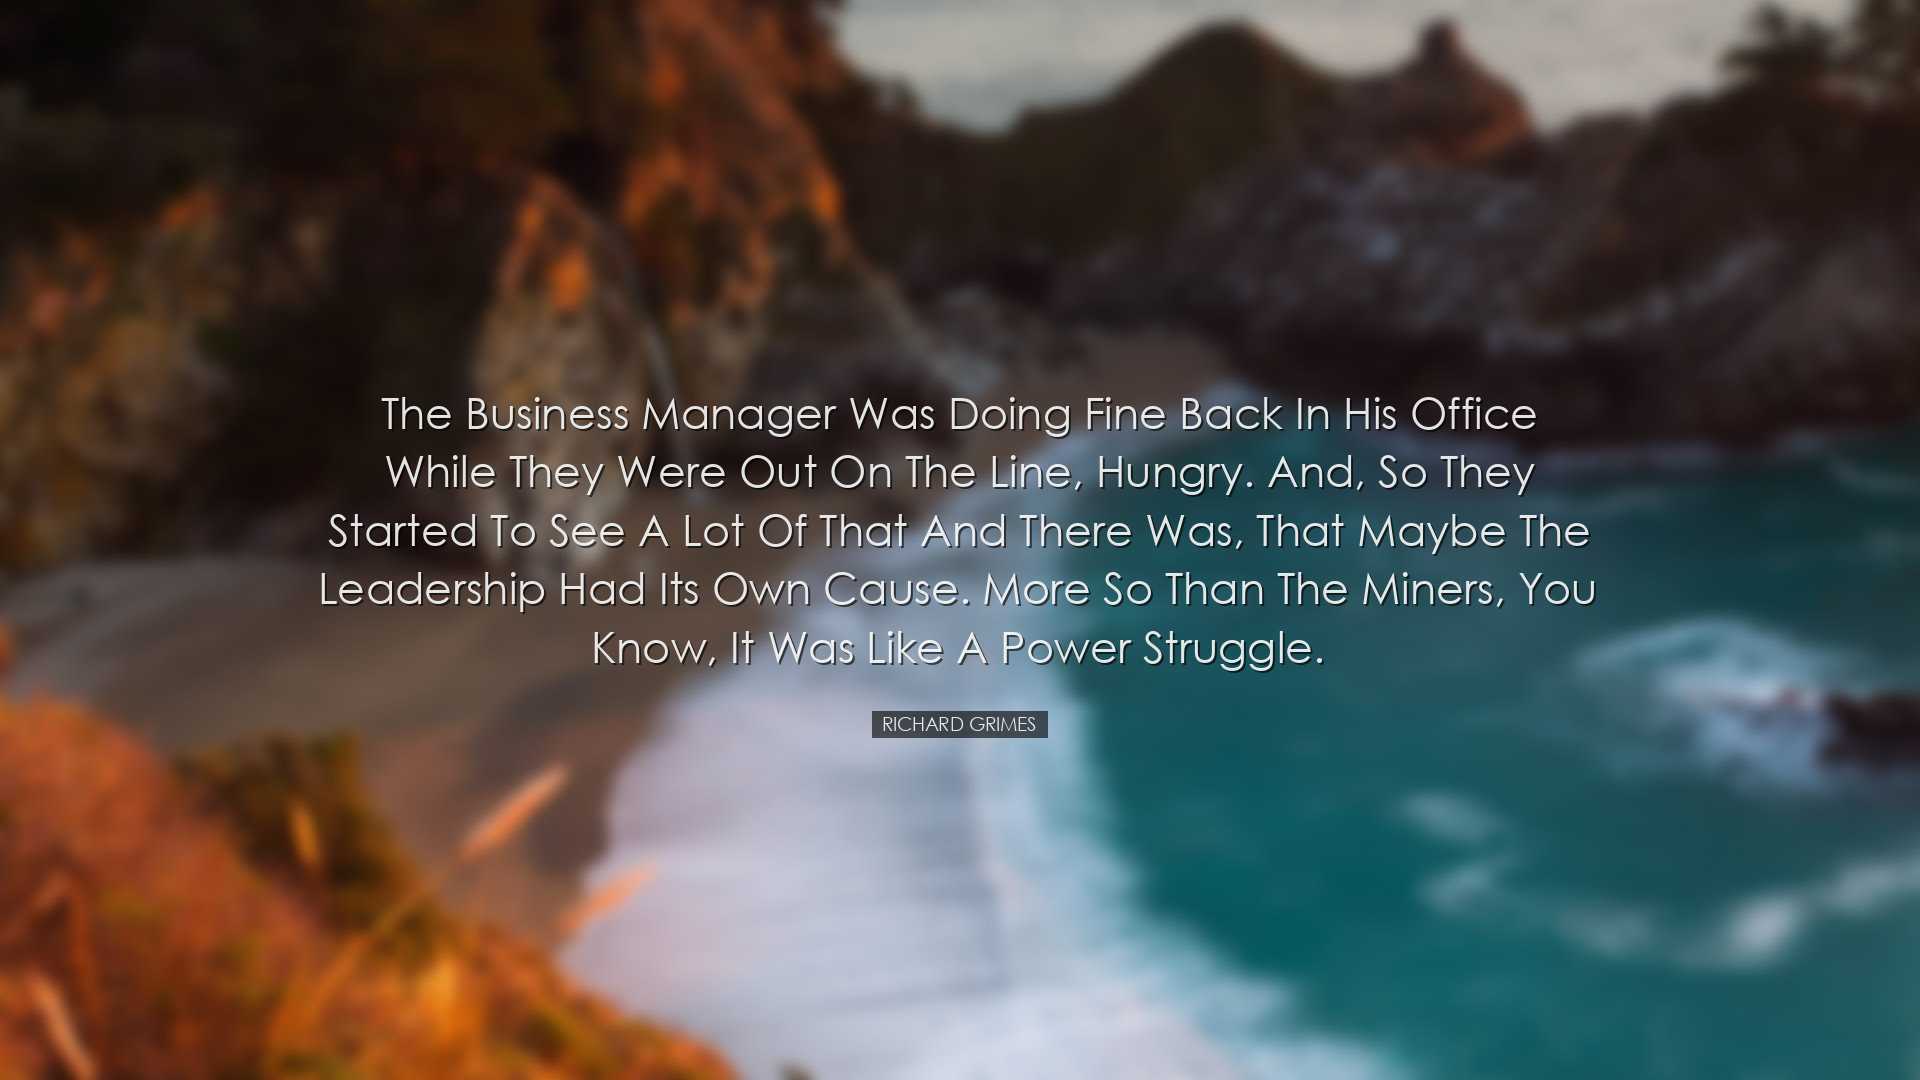 The business manager was doing fine back in his office while they